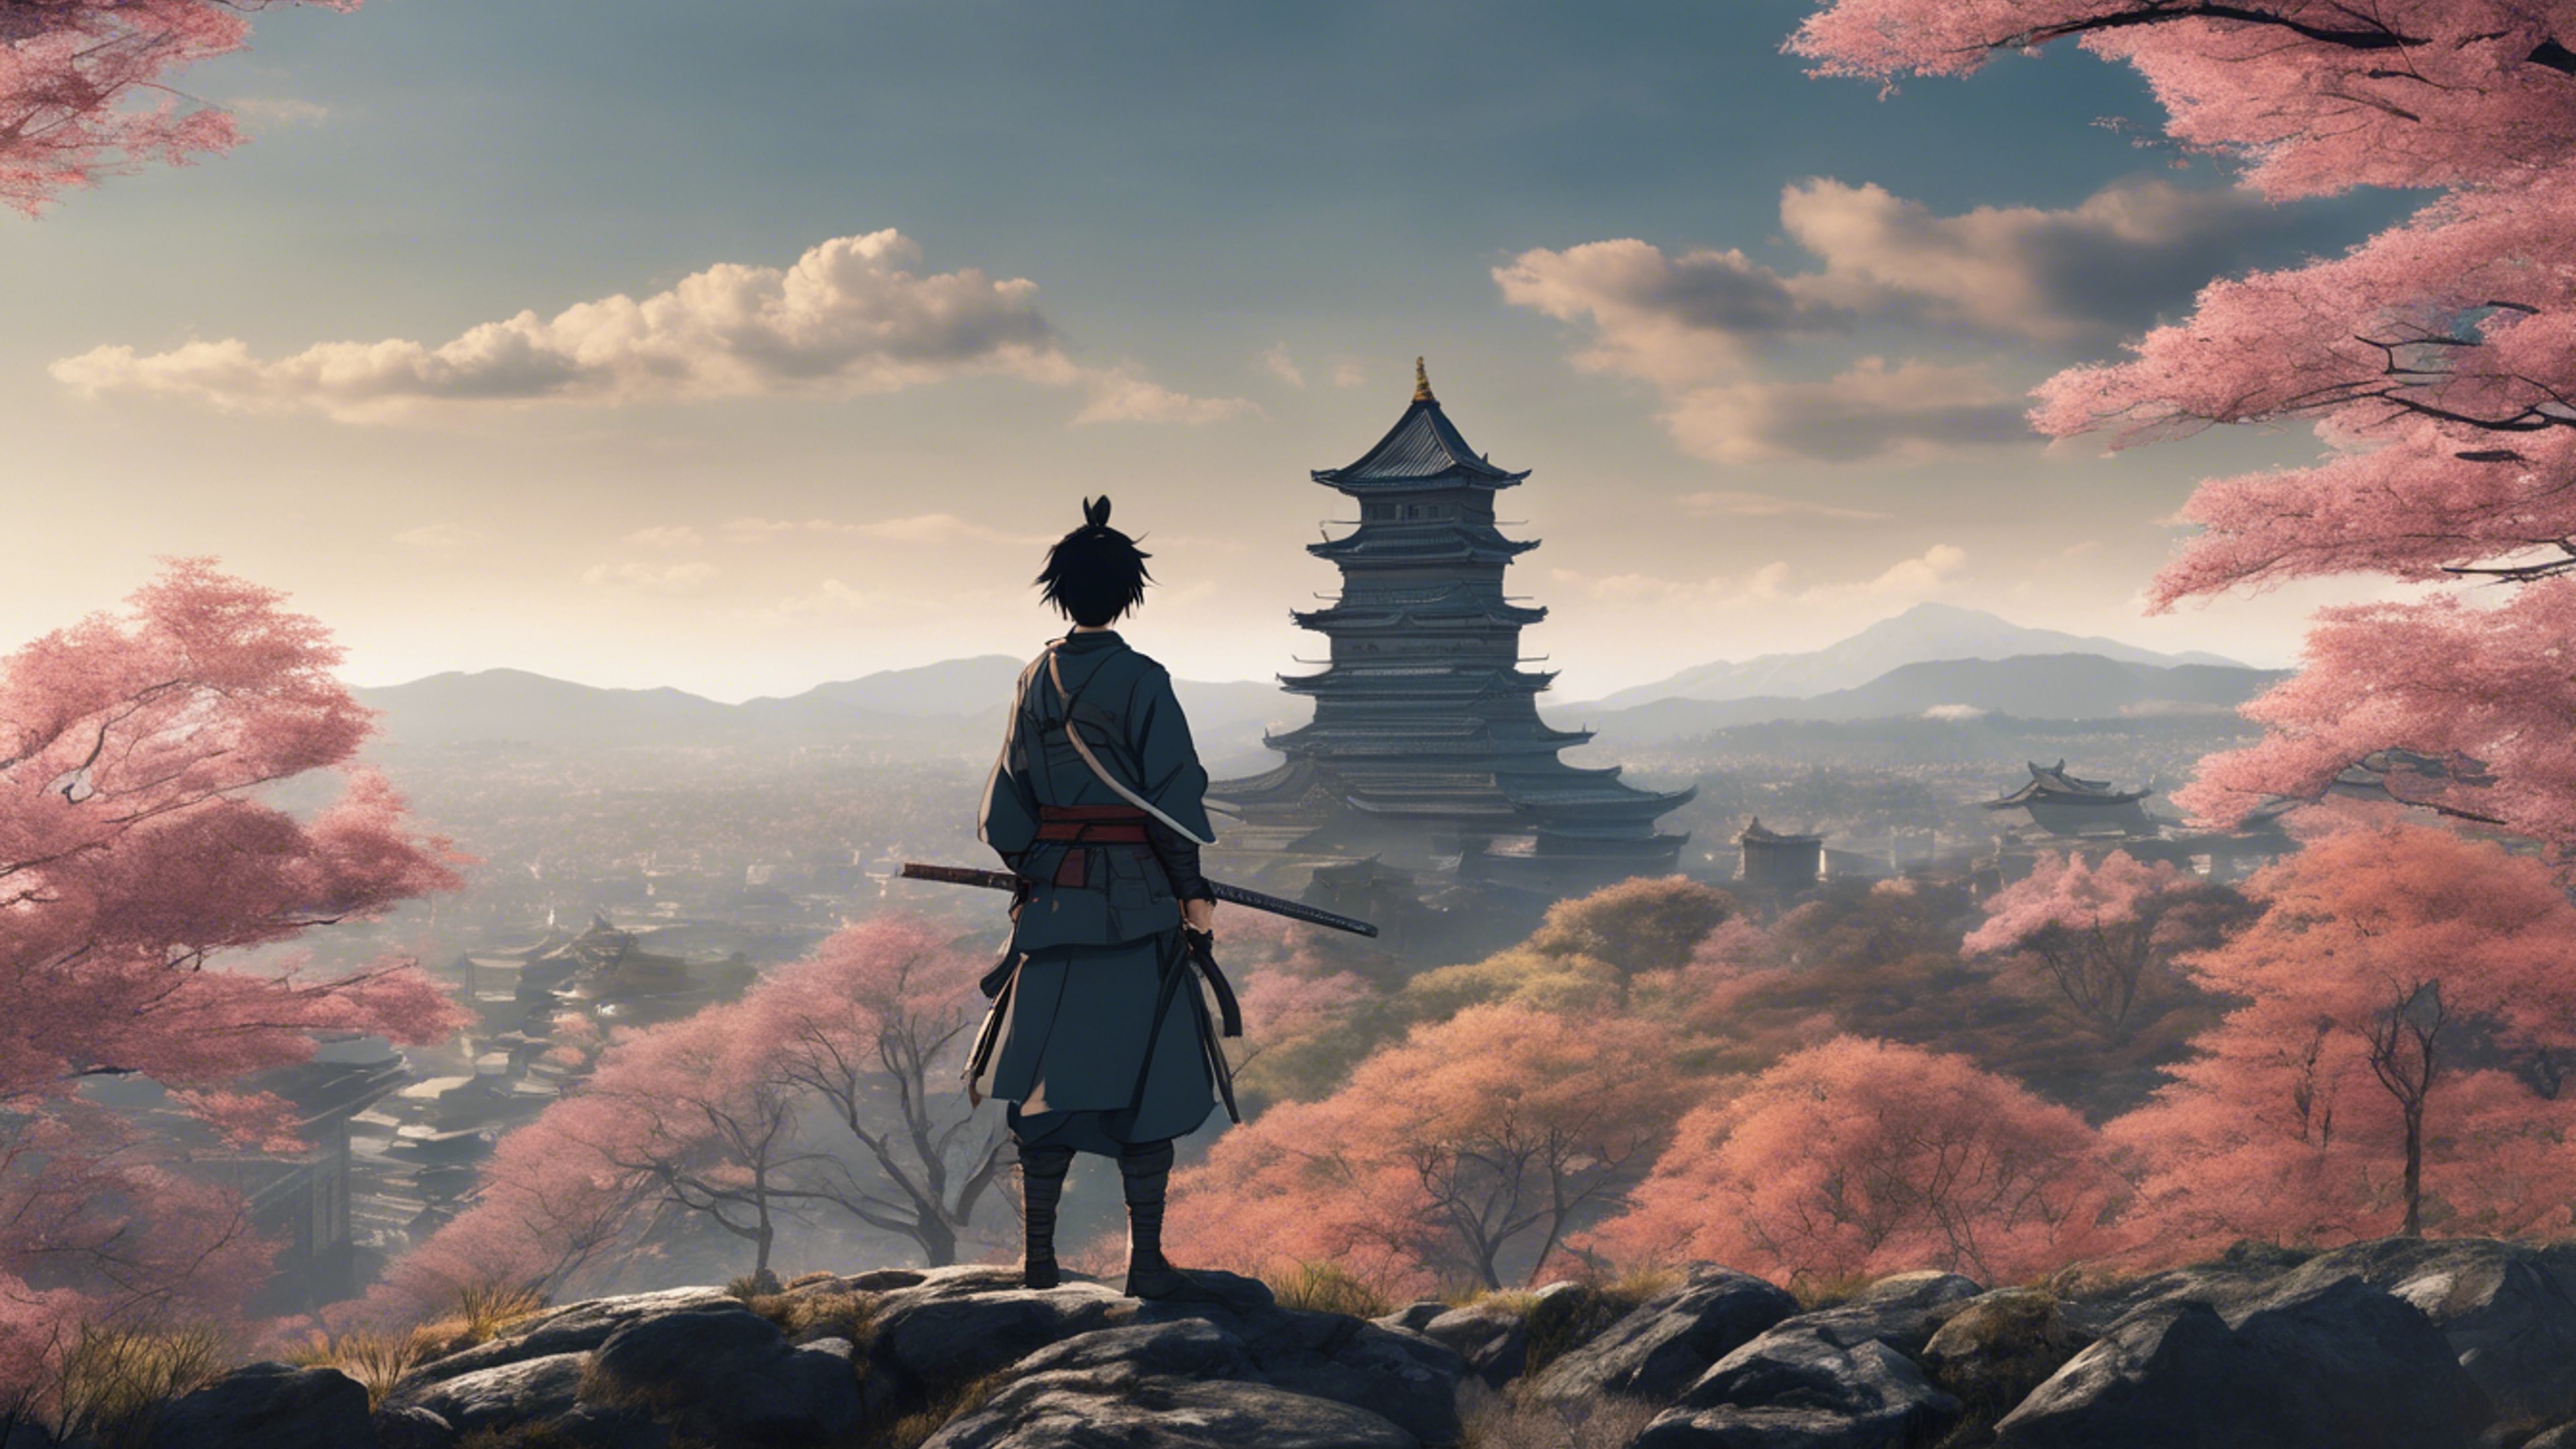 Anime samurai boy standing on a rocky hillside and looking towards a feudal-era Japanese castle. Валлпапер[9402636a9a6e4b8c90bb]